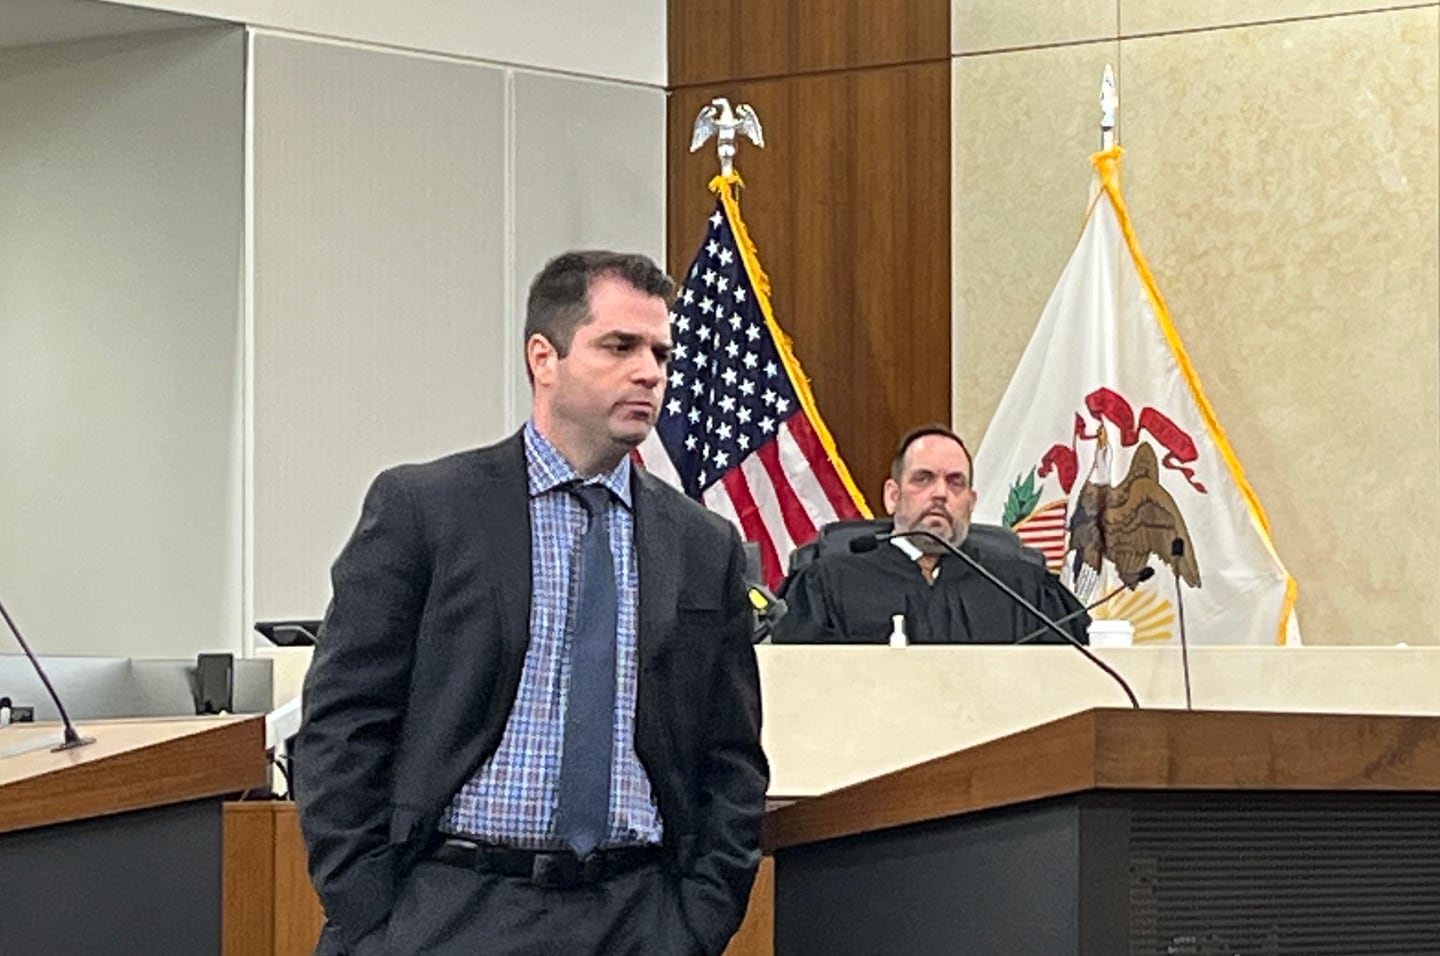 Will County Assistant State's Attorney Jeffrey Tuminello delivers opening statements on Wednesday, March 23, 2022, in the reckless homicide trial against Sean Woulfe.